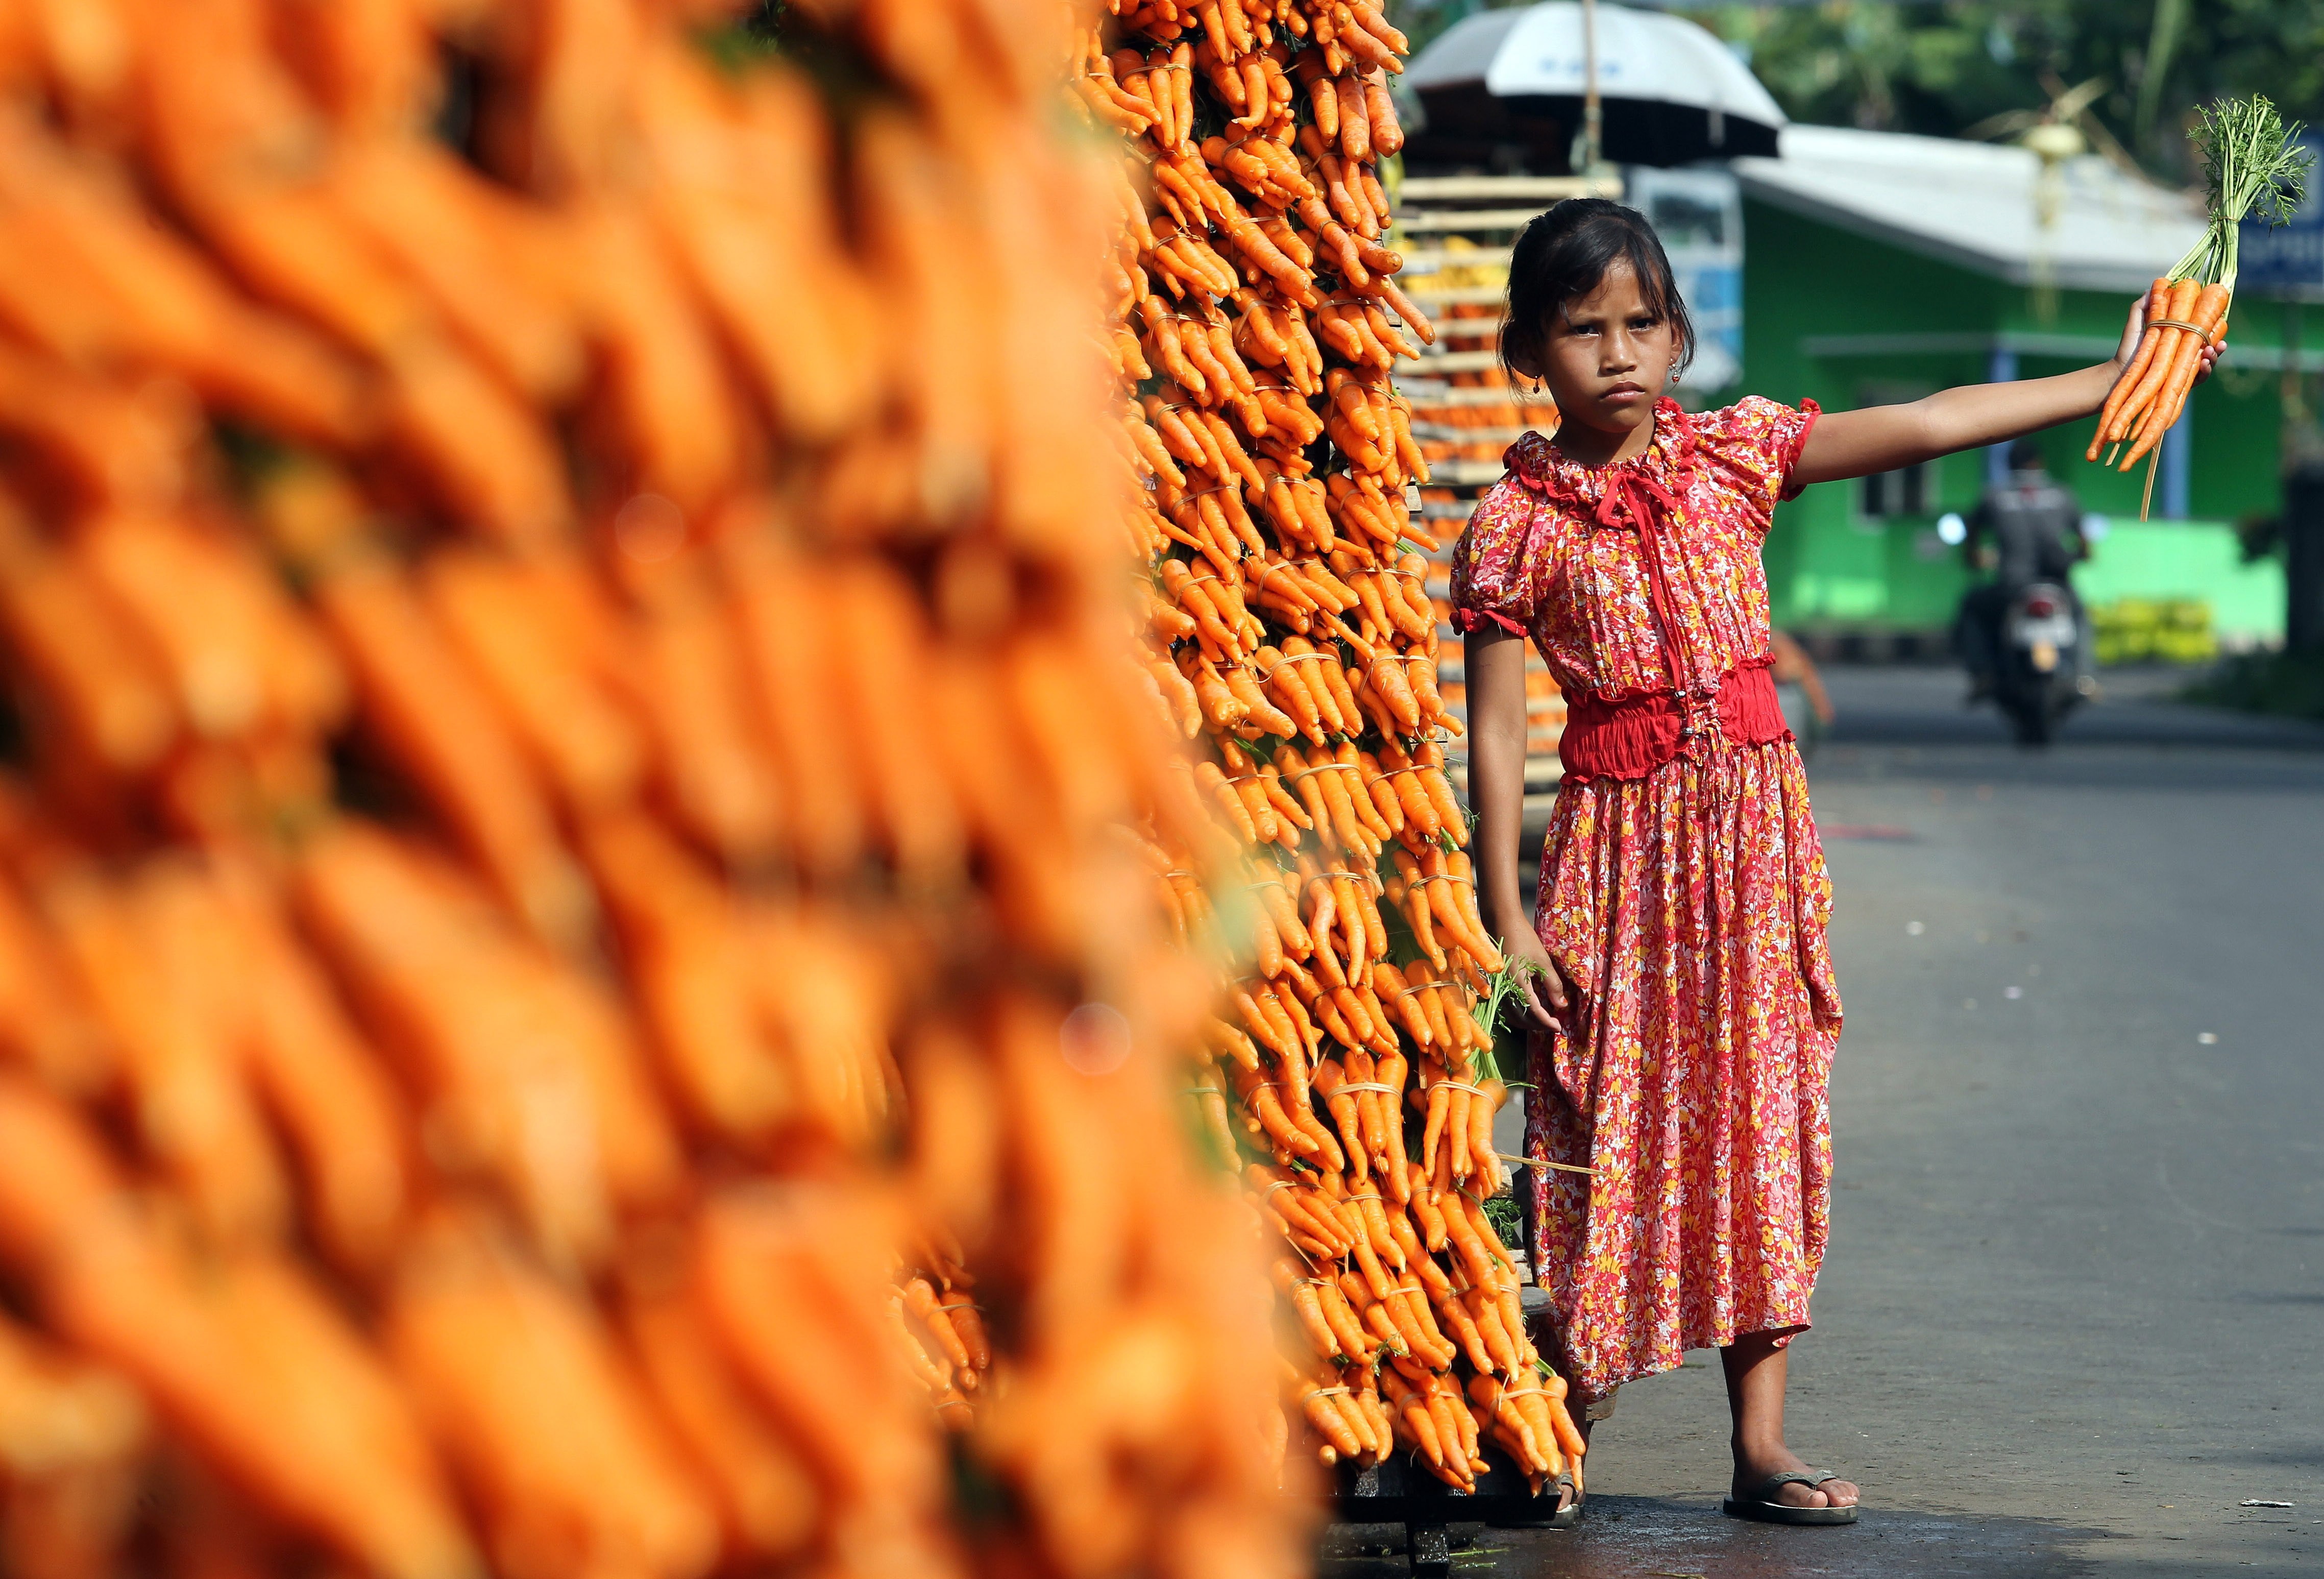 A young vendor holds a bunch of carrots for sale on a street in Cisarua Bogor, Indonesia, on September 24, 2012. Photo: EPA-EFE